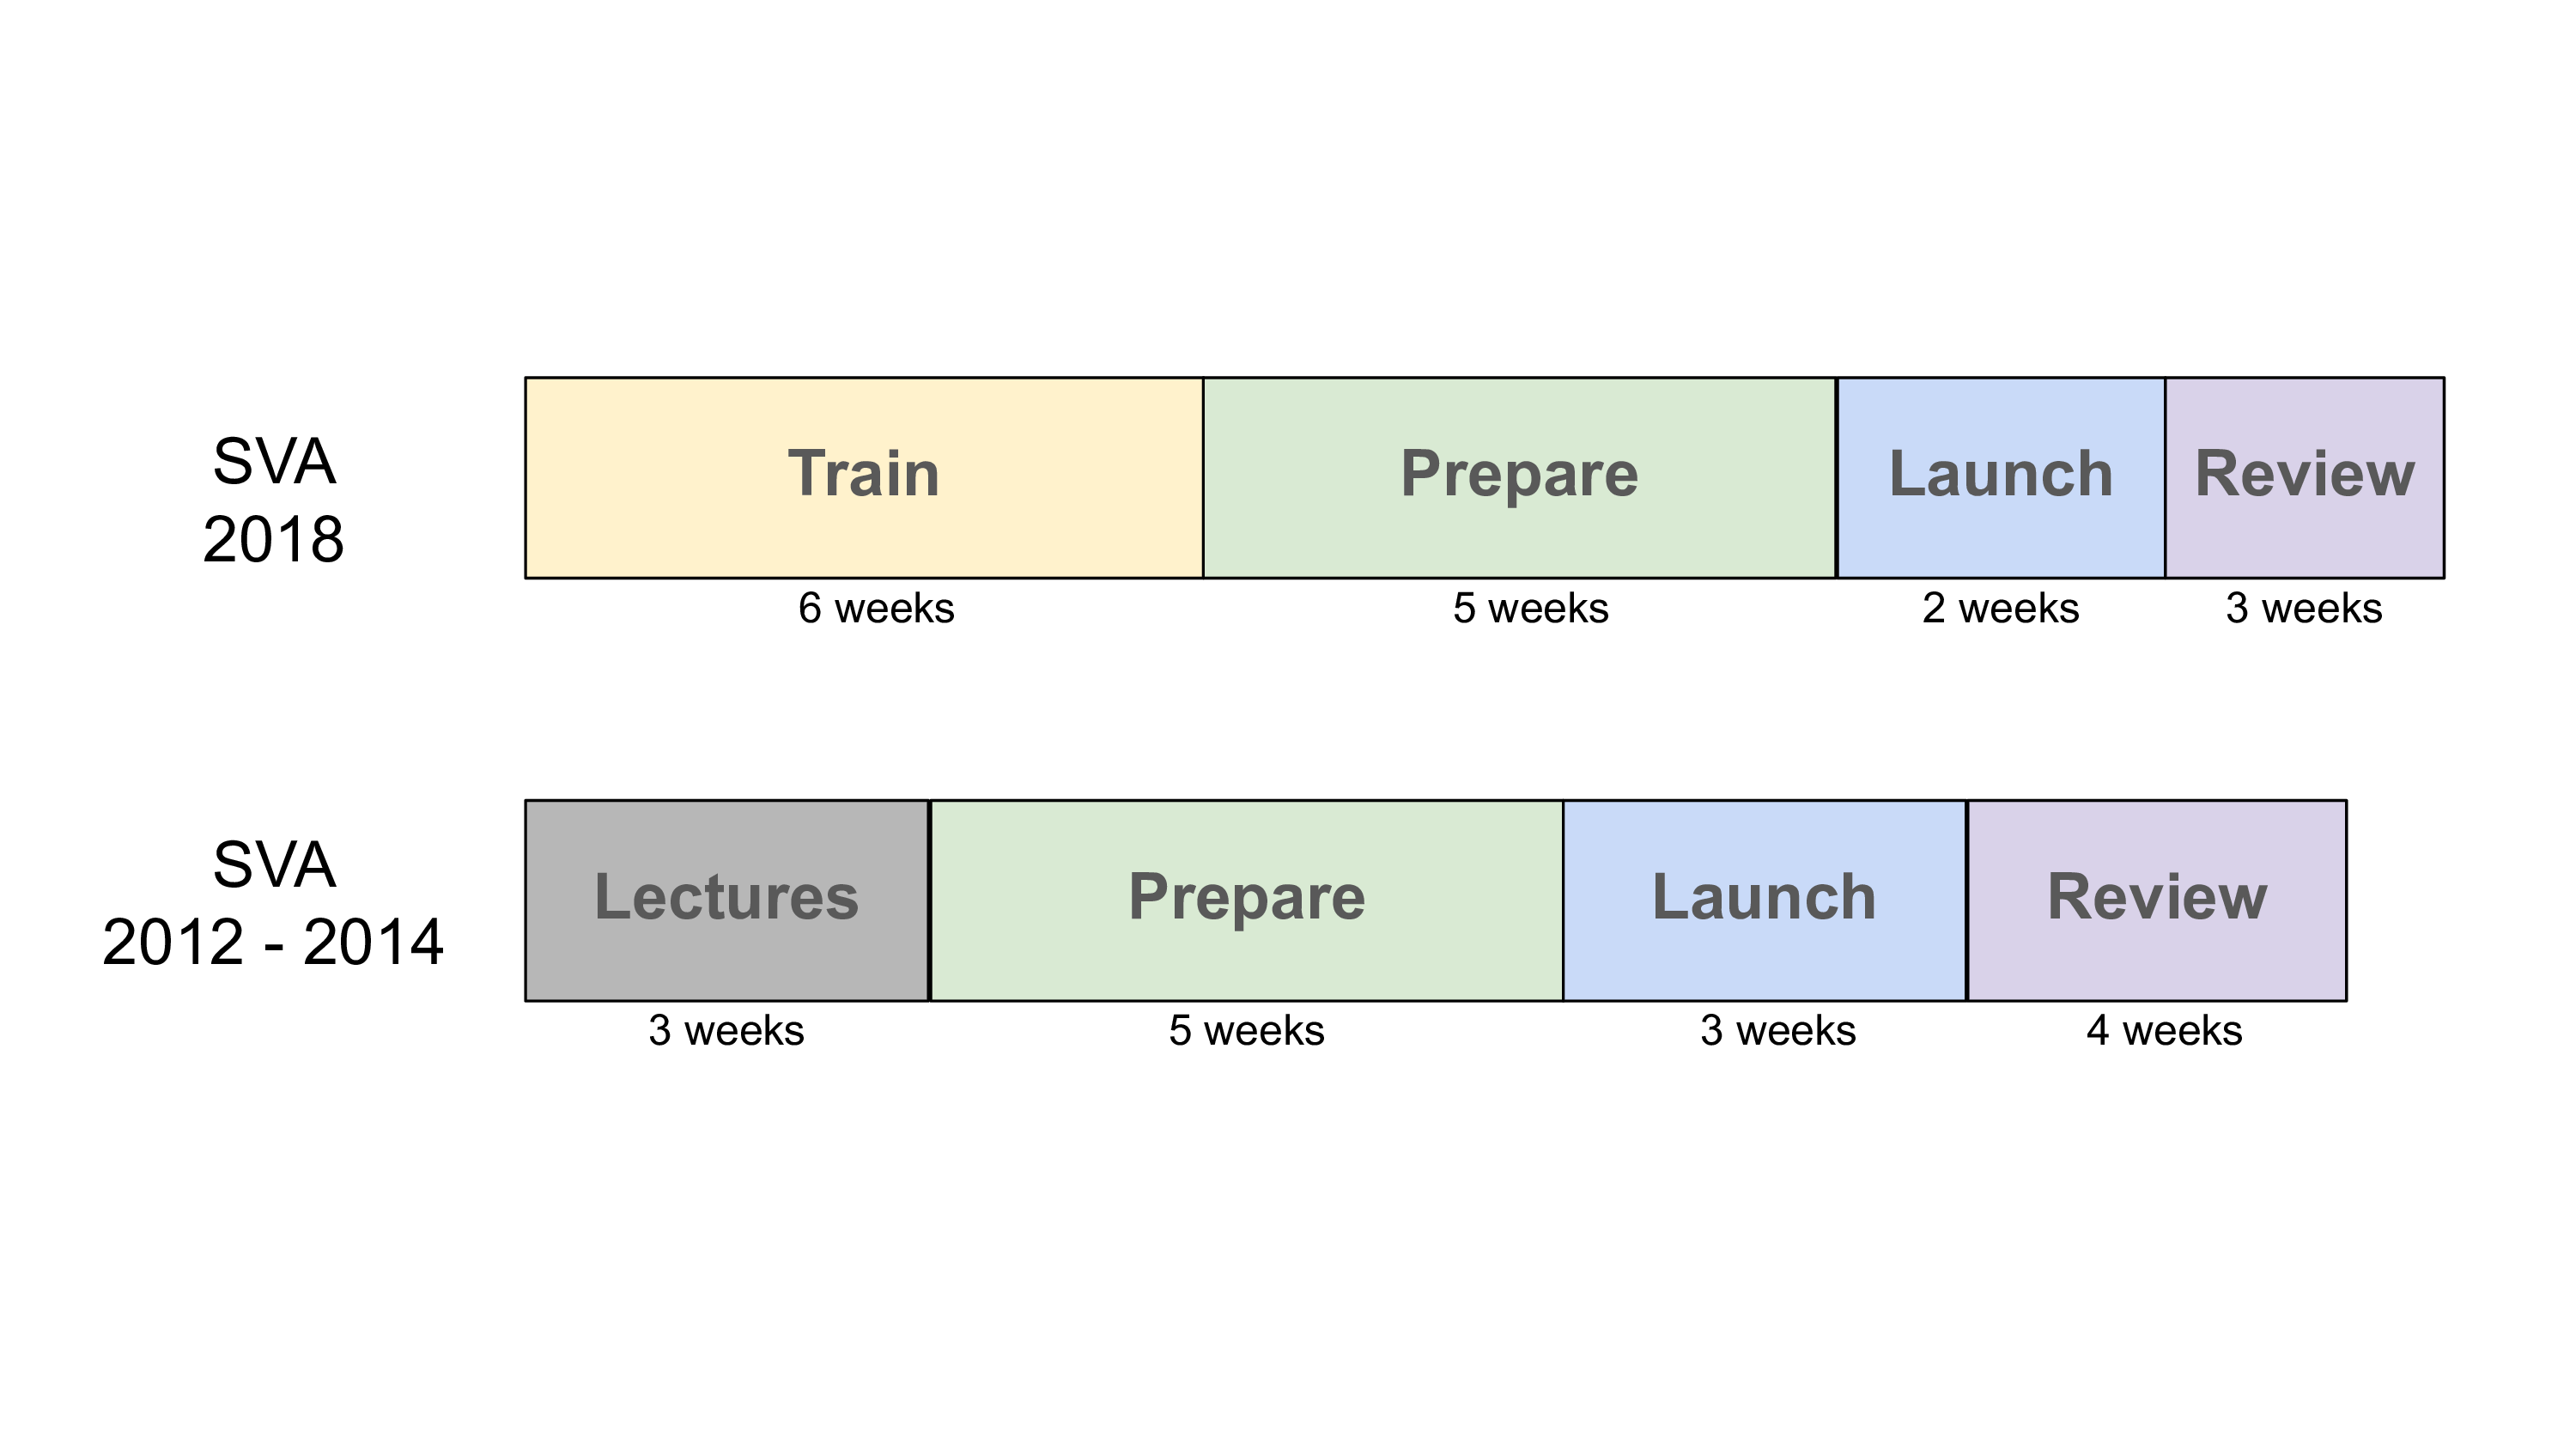 Earlier on, we lectured for the first 3 weeks of class and then leapt into Prepare (5 weeks), Launch (3 weeks), and Review (4 weeks). In our latest iteration, we spent 6 weeks on Train, 5 weeks on Prepare, 2 weeks on Launch, and 3 weeks on Review.